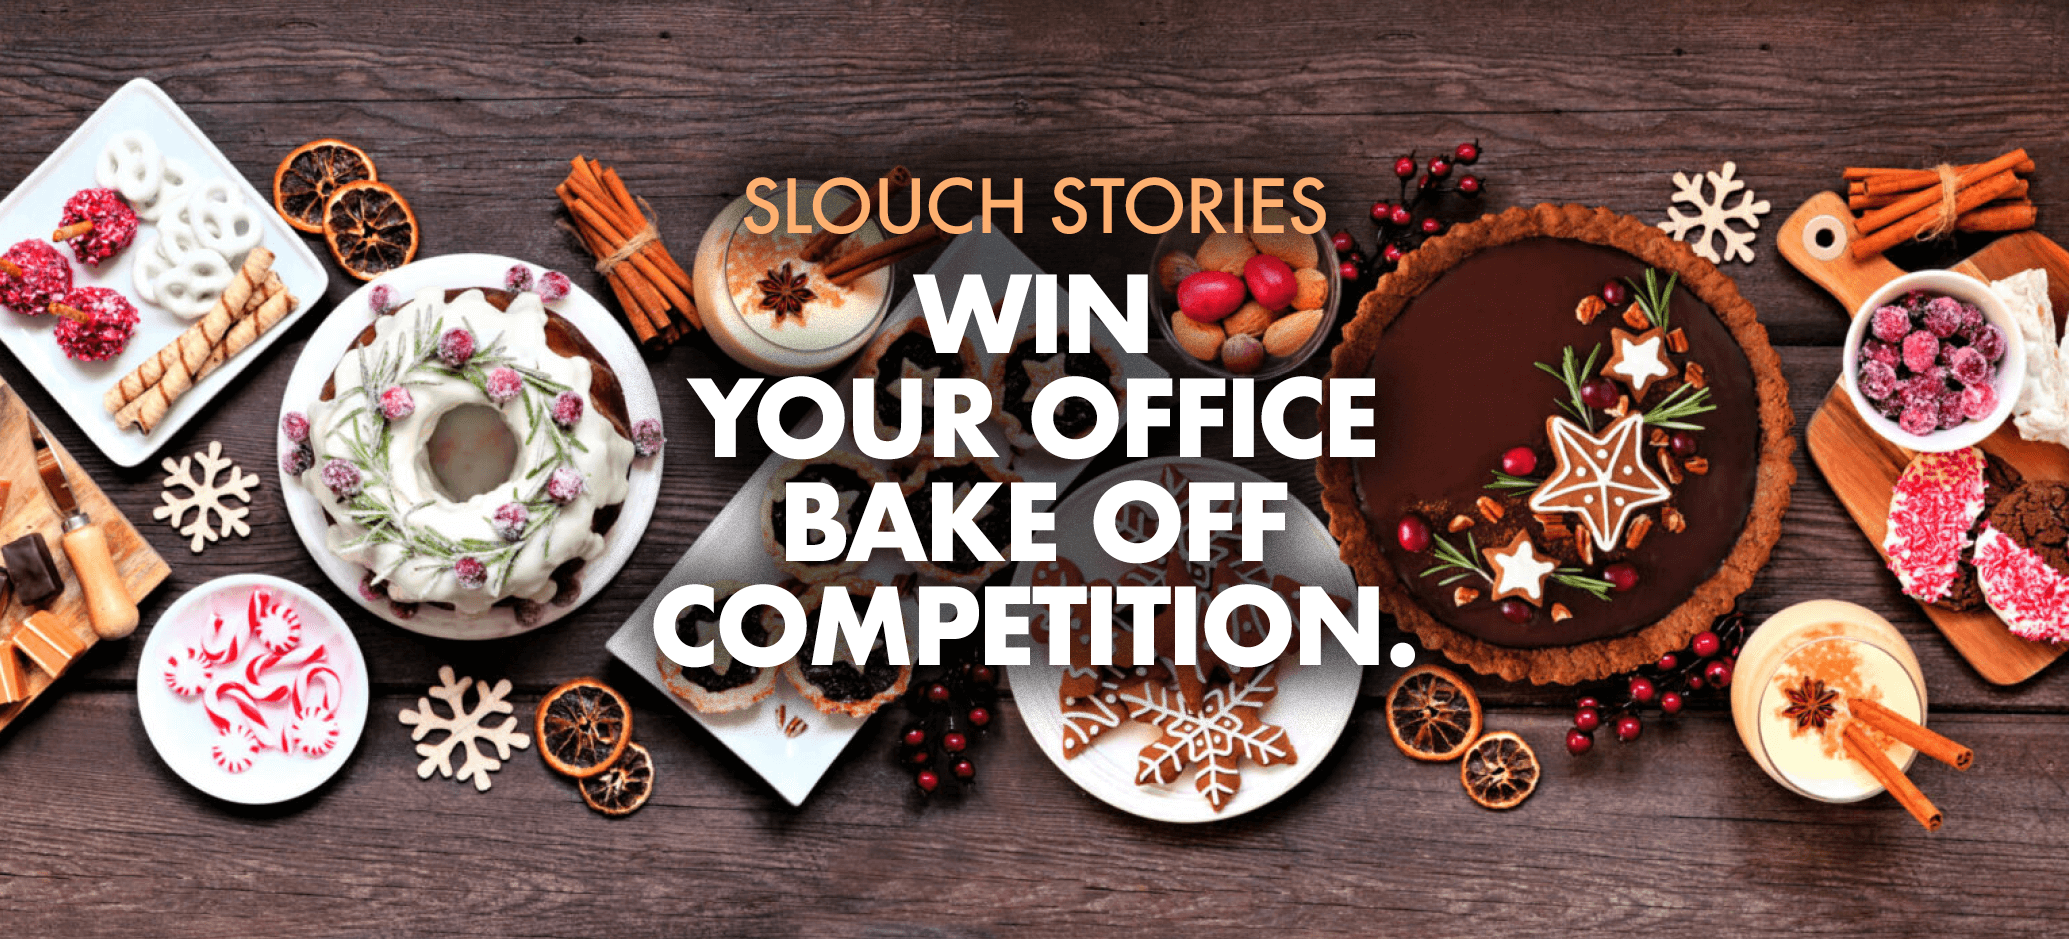 Win Your Office Bake Off Competition Blog Featured Image